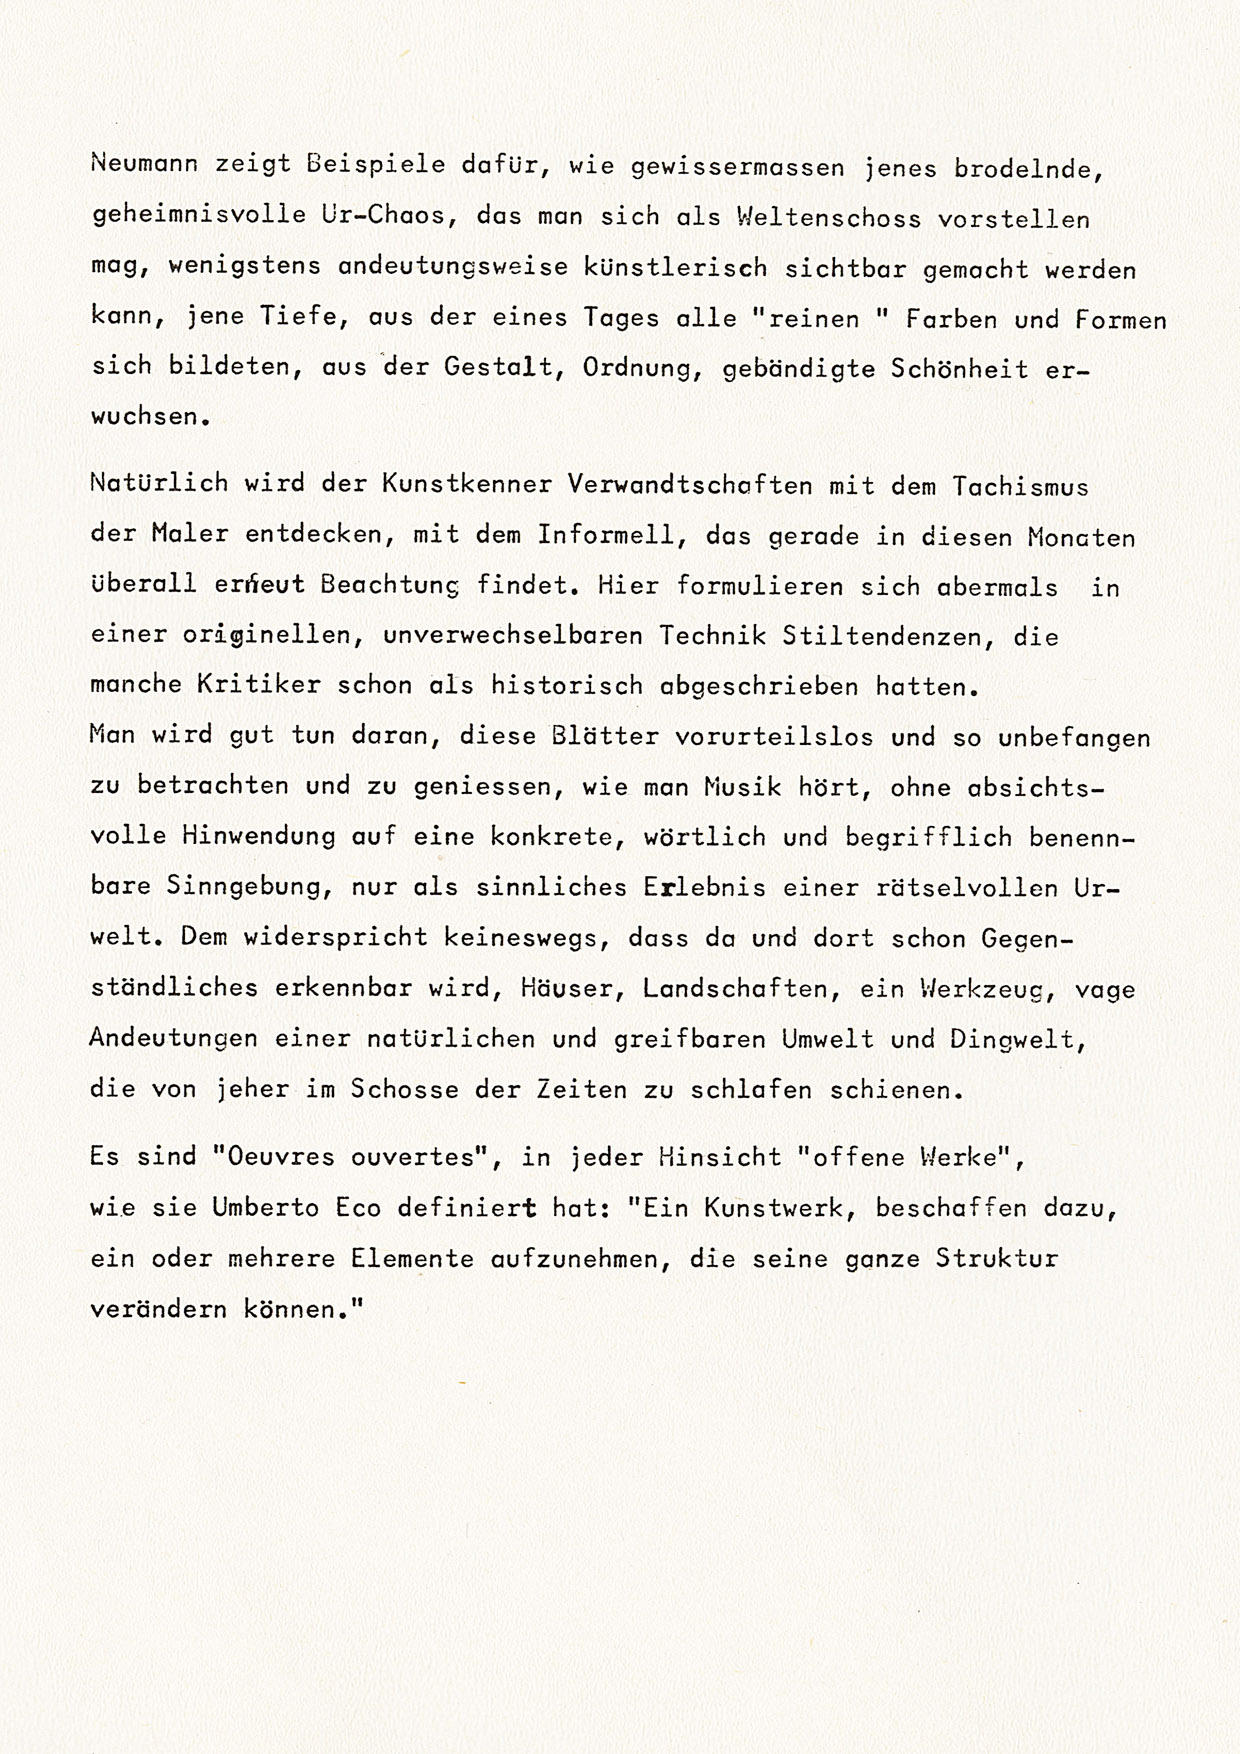 Remarks on the Chemograms by Prof. Dr. Hannes Schmidt, Bonn-Bad Godesberg on the occation of the opening of the Exhibition CHEMOGRAMME in the "fotografik-studio-galerie
 Prof Pan Walther" in Münster, May, 1976